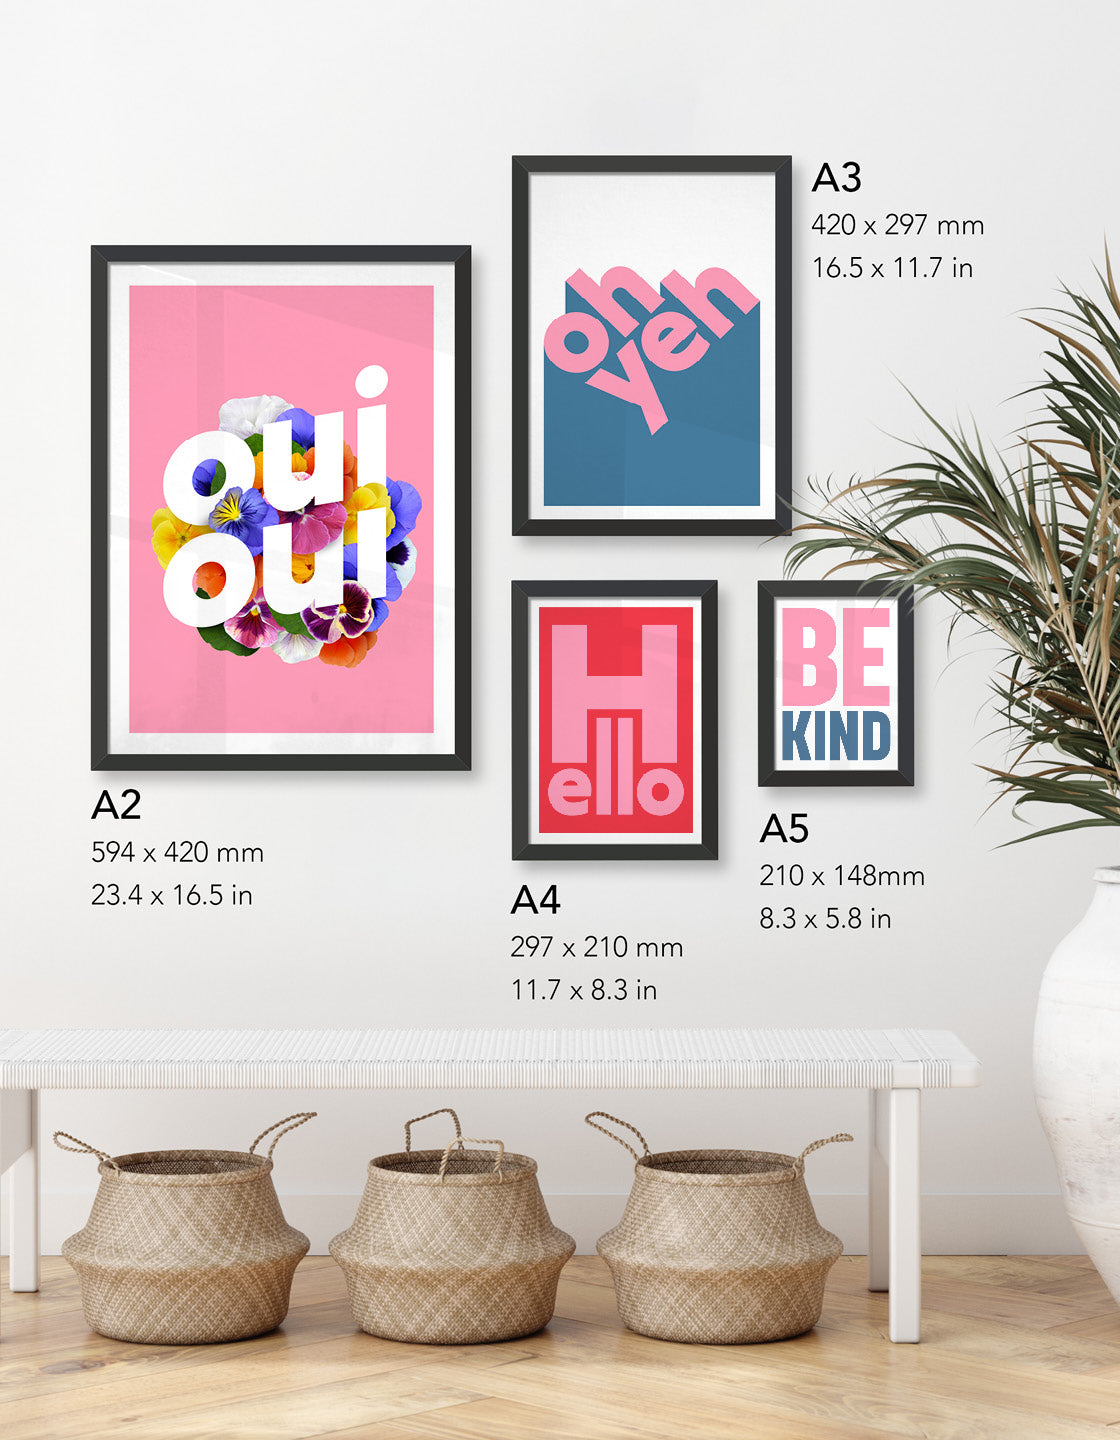 image depicting four different size prints available in the Oui Oui collection; A5, A4, A3 and A2